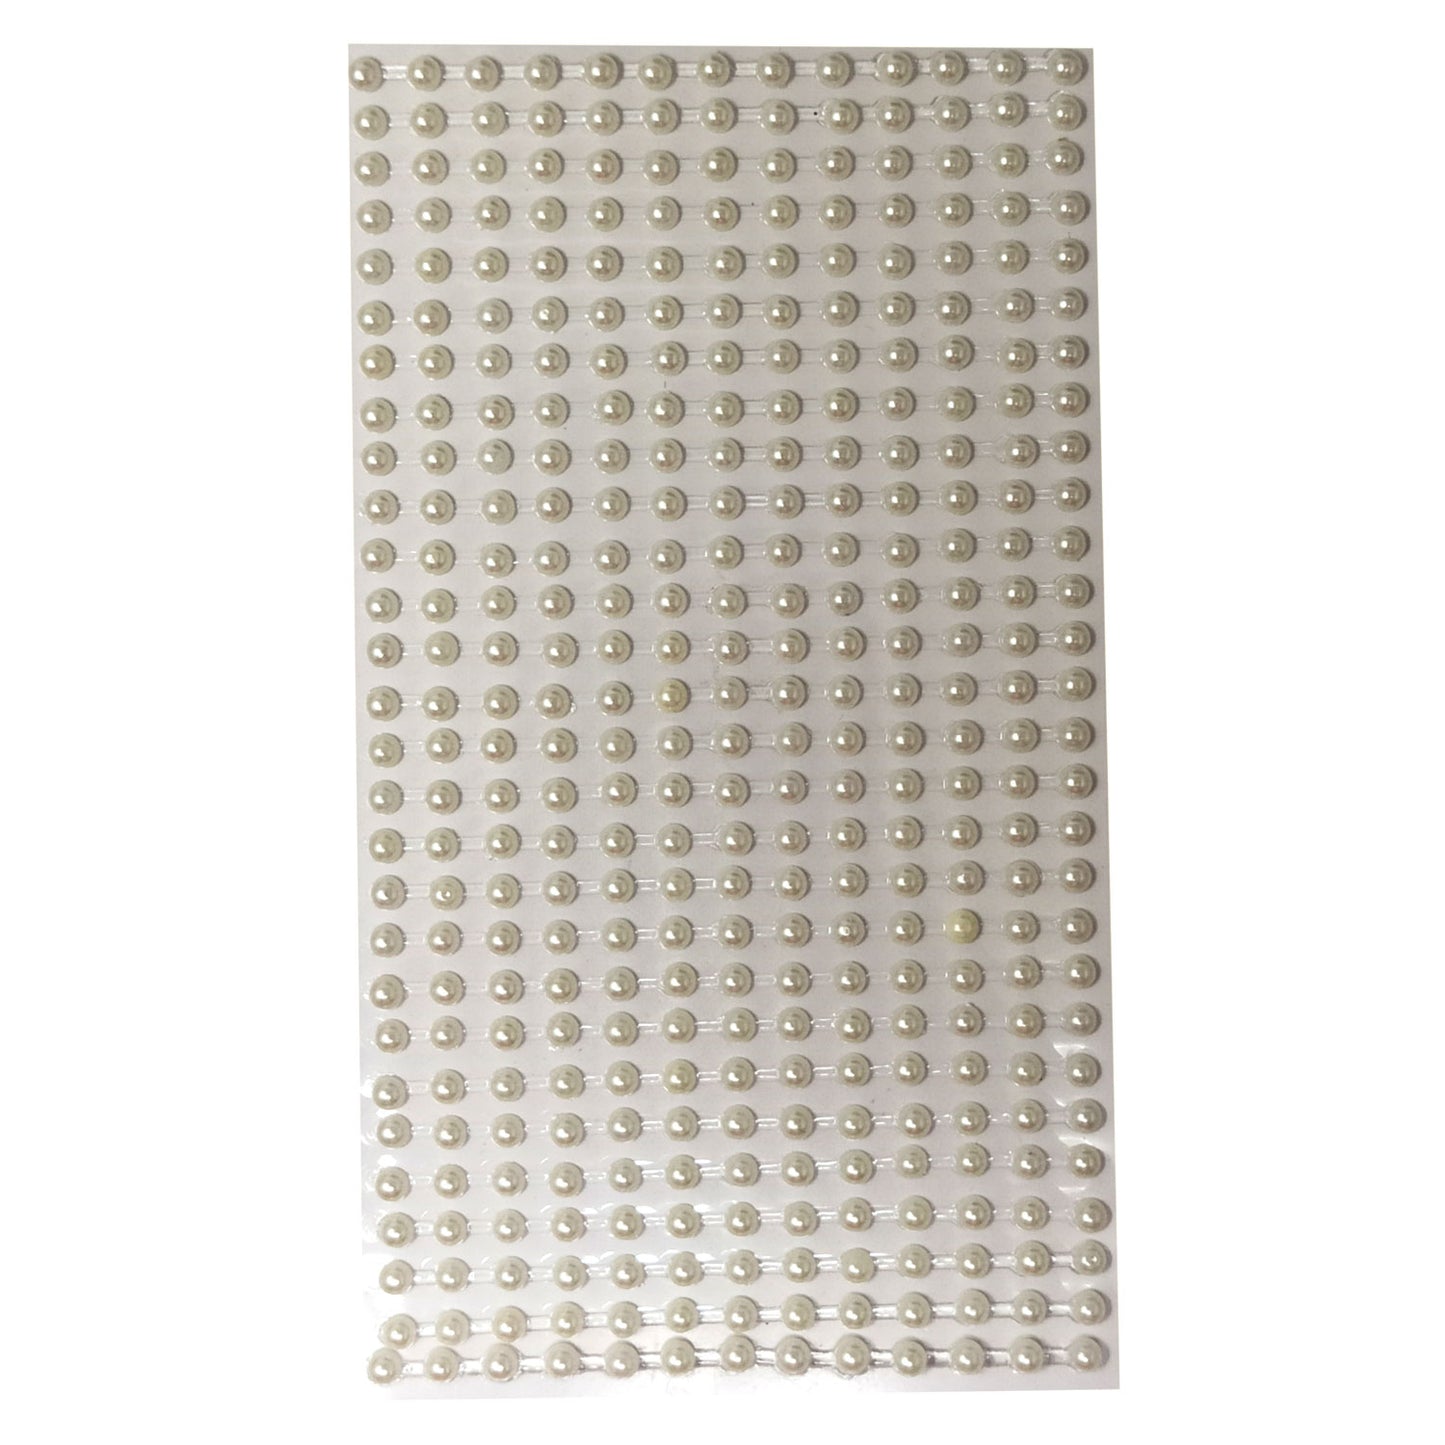 4 mm Half Pearl Bead Sticker (Pack of 1 sheets, DC-10)